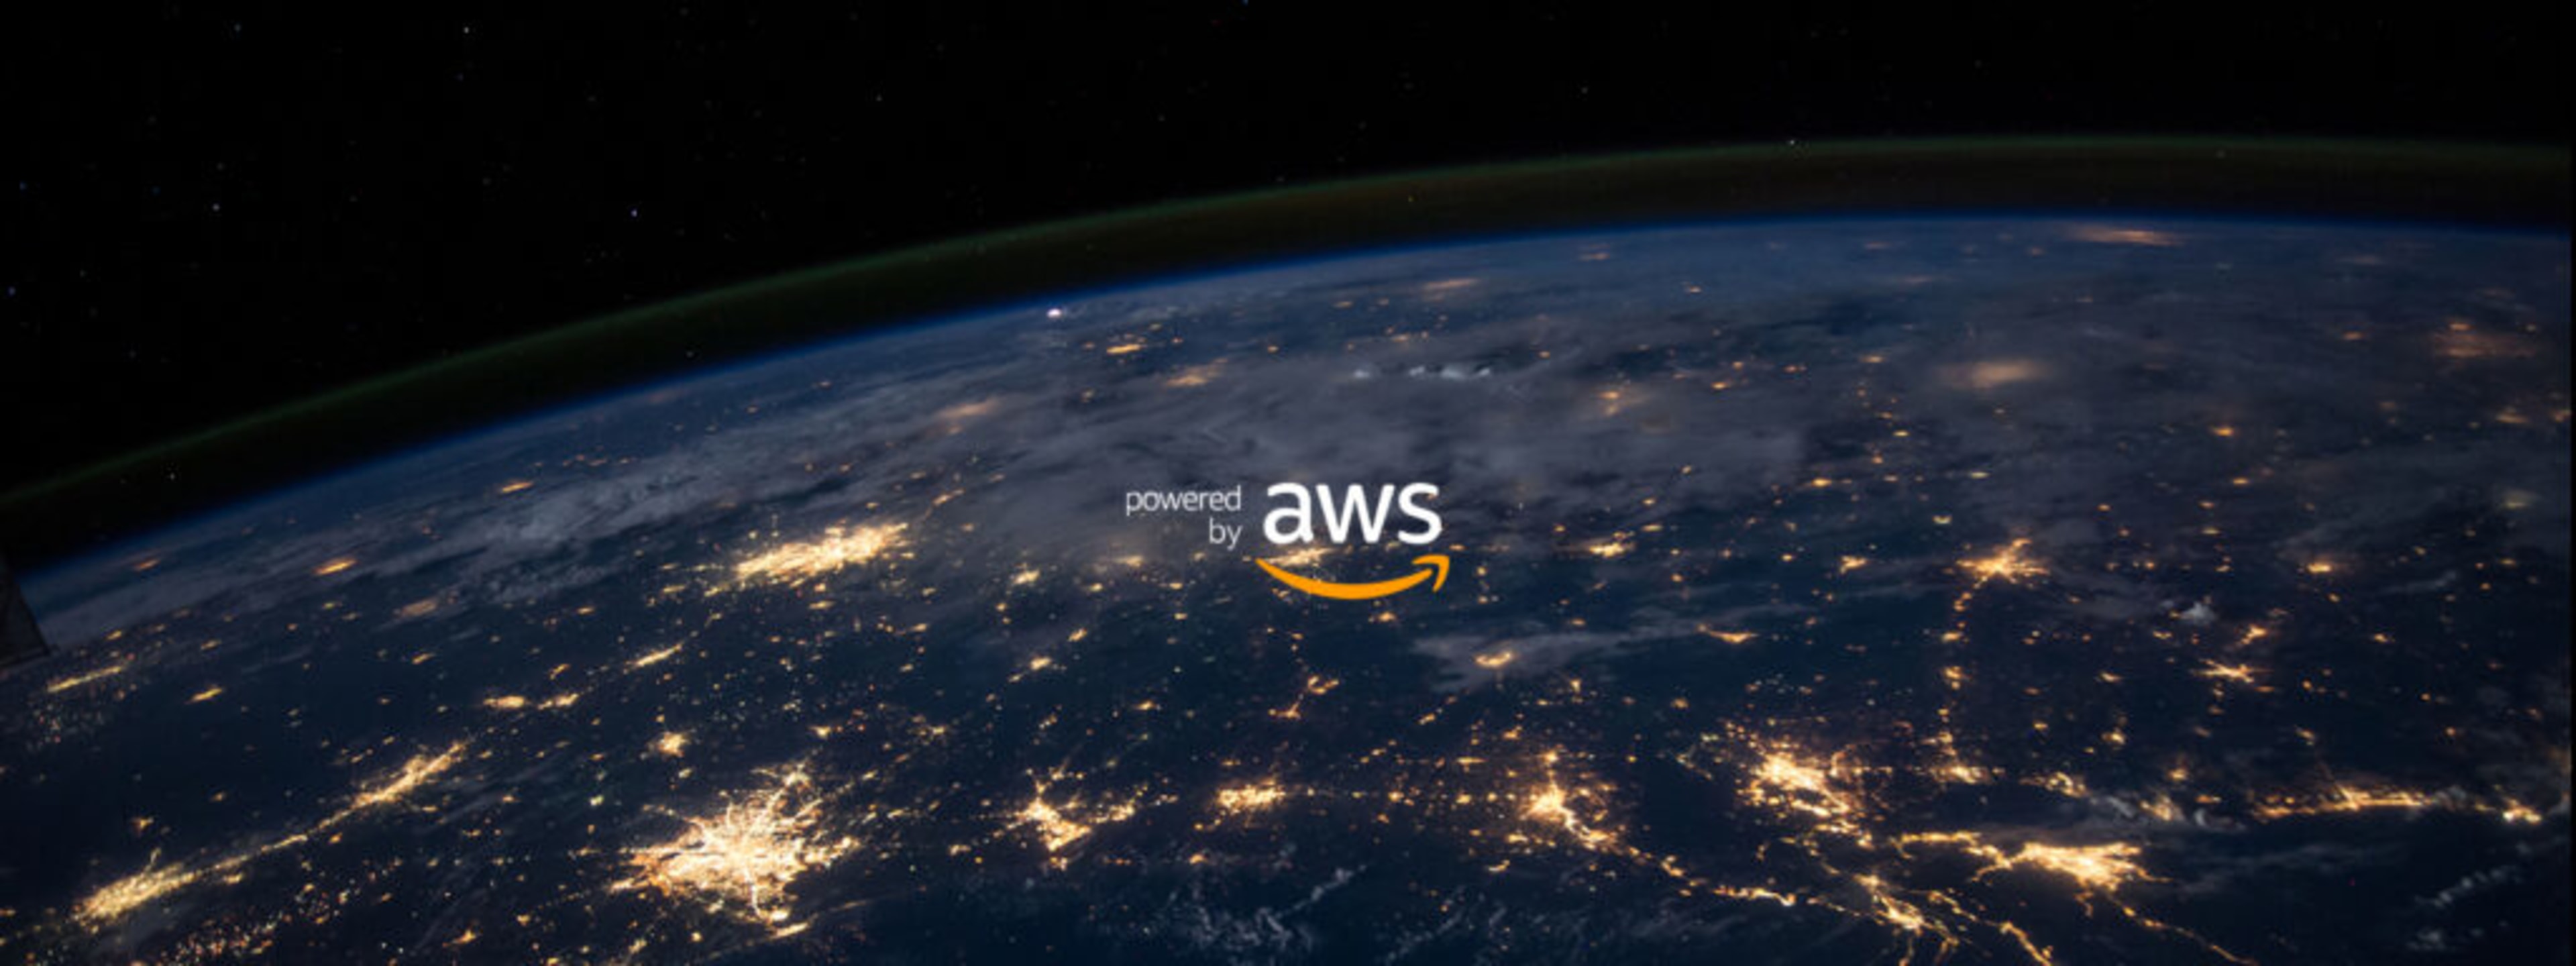 Planet glowing with digital lights, indicative of the expansive AWS cloud computing universe